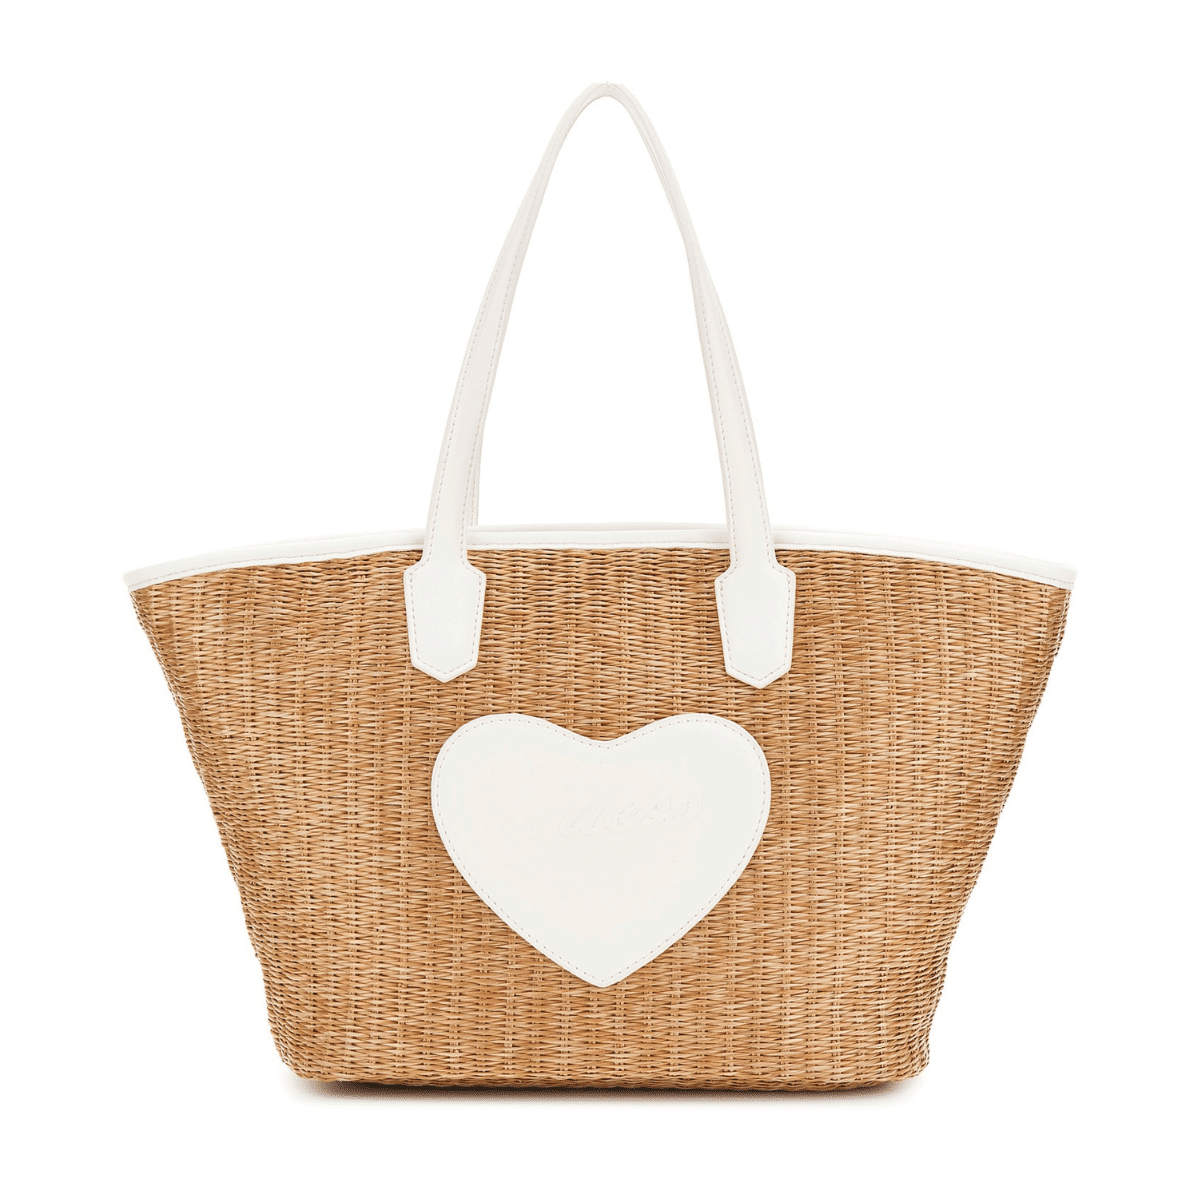 guess girls rafia tote bag with white heart